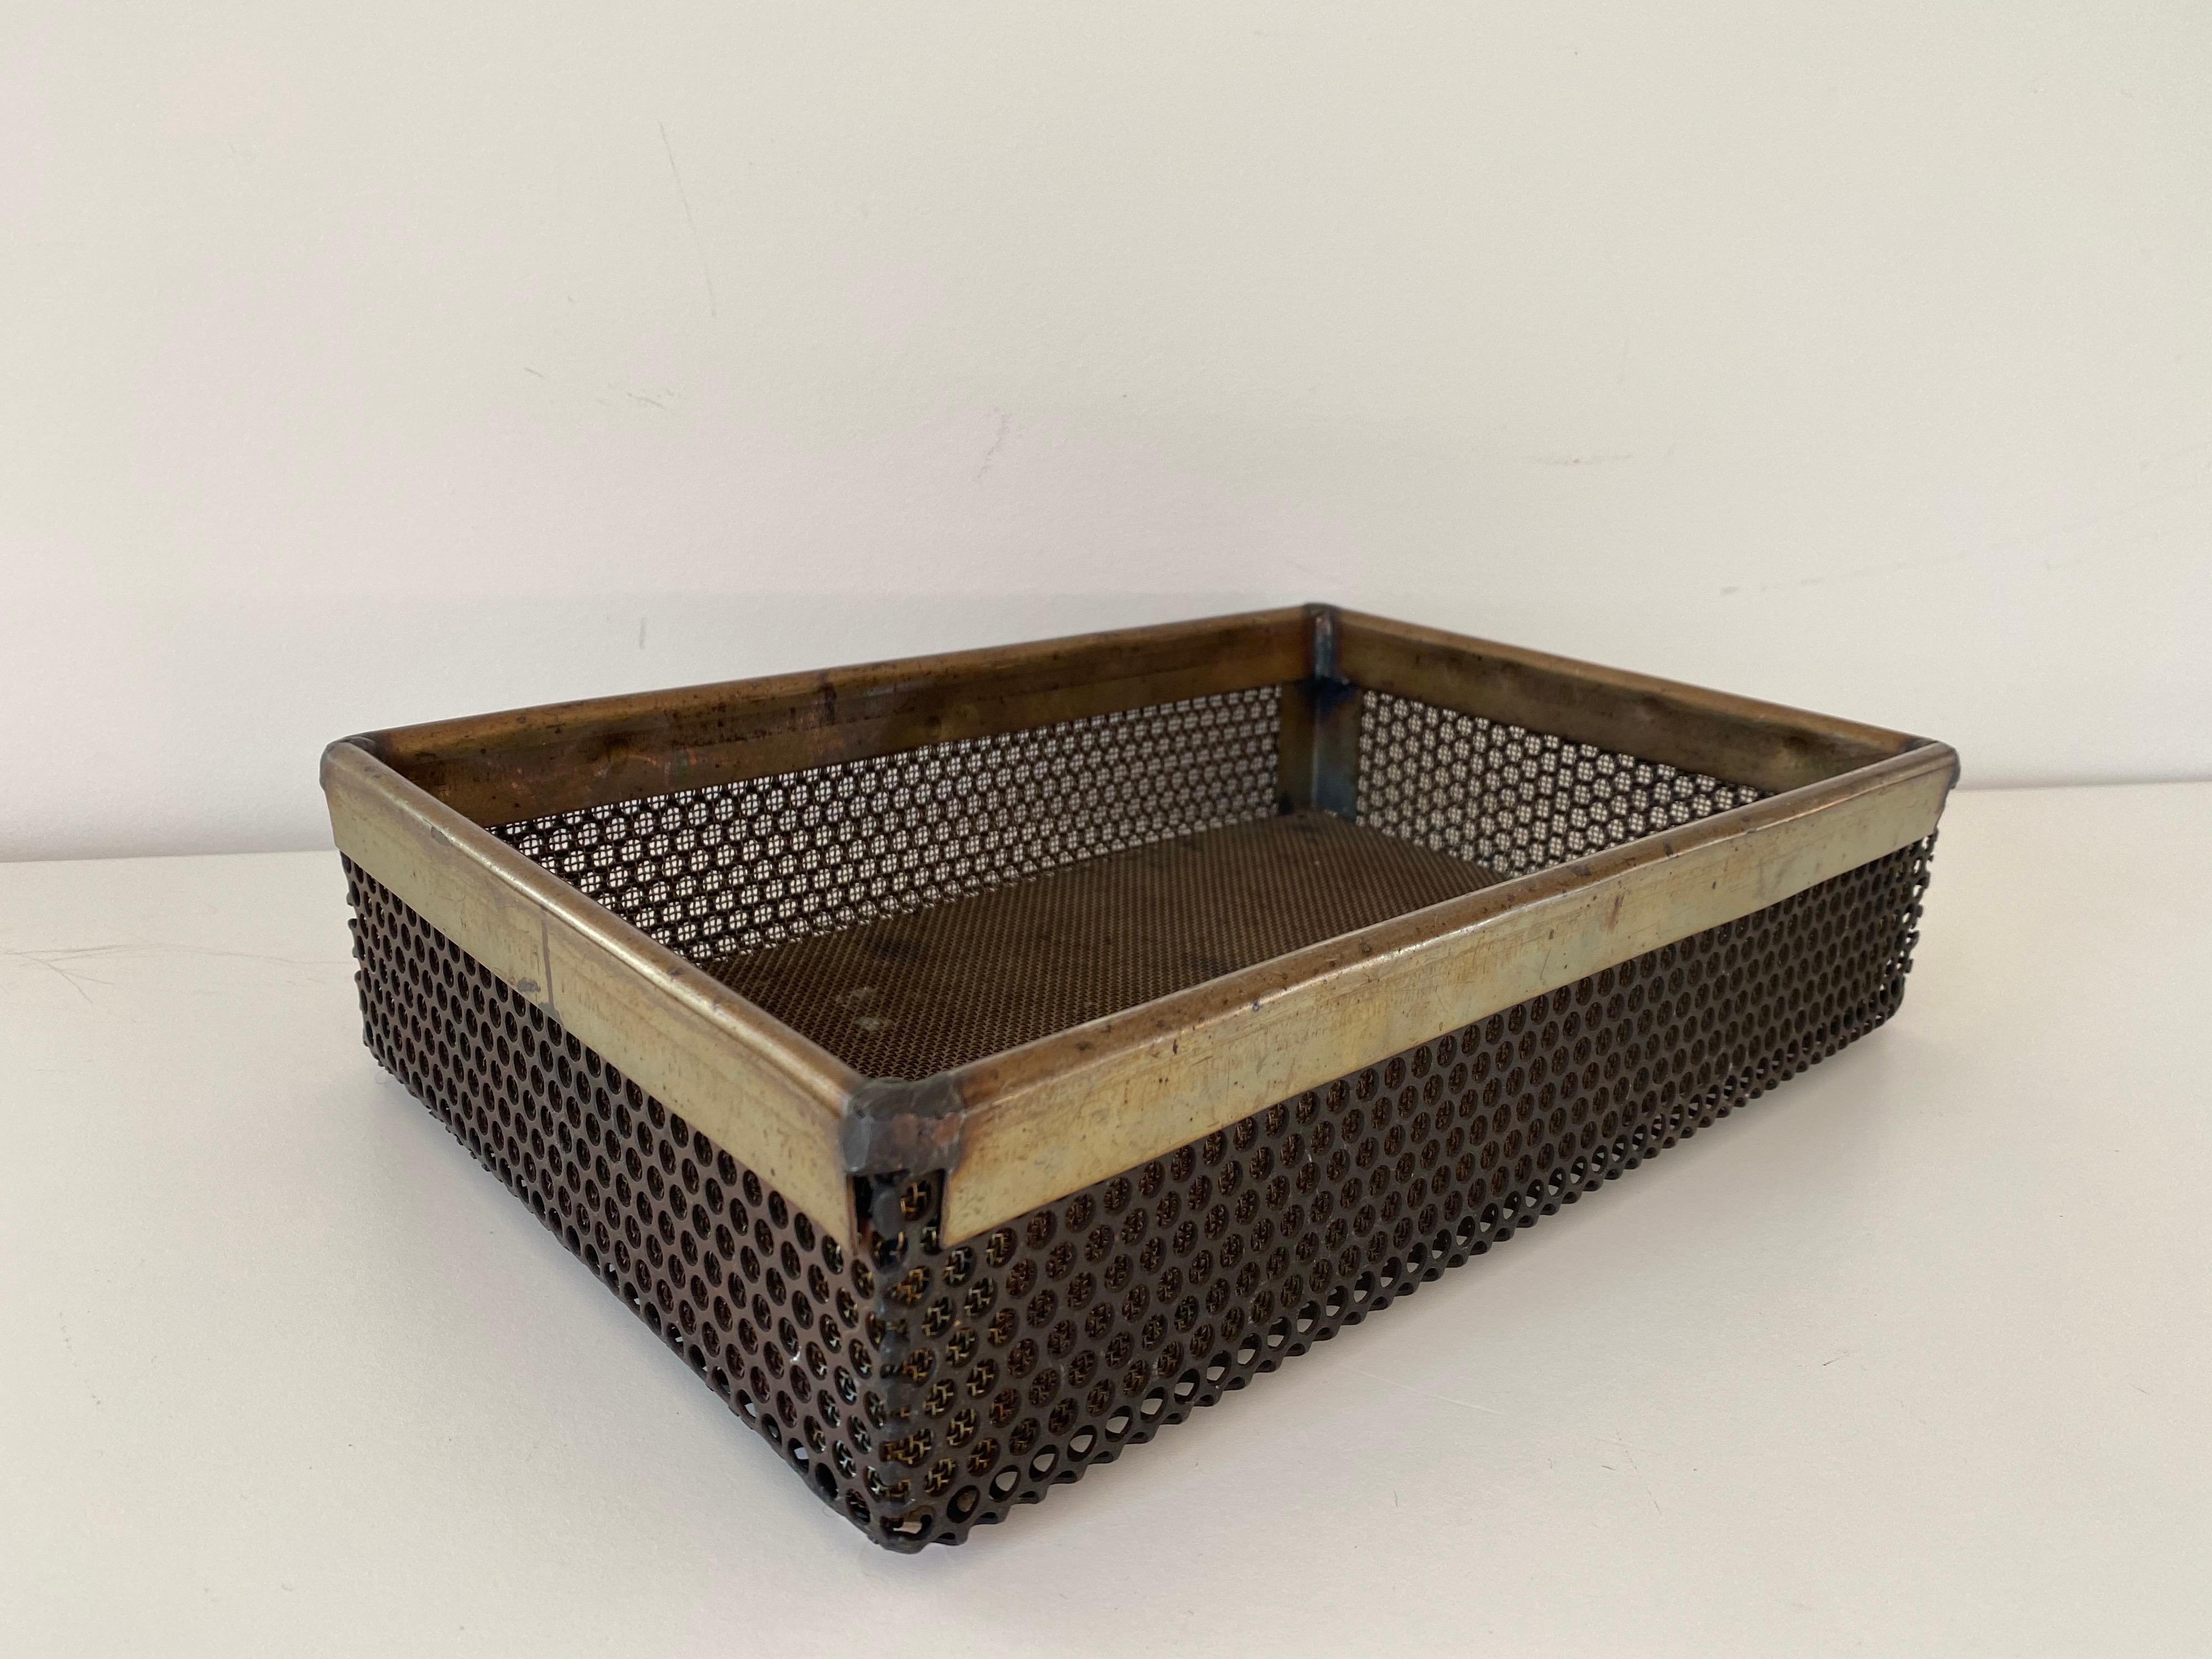 A Mathieu Matégot metal perforated tray. This rare example includes thick brass banding.